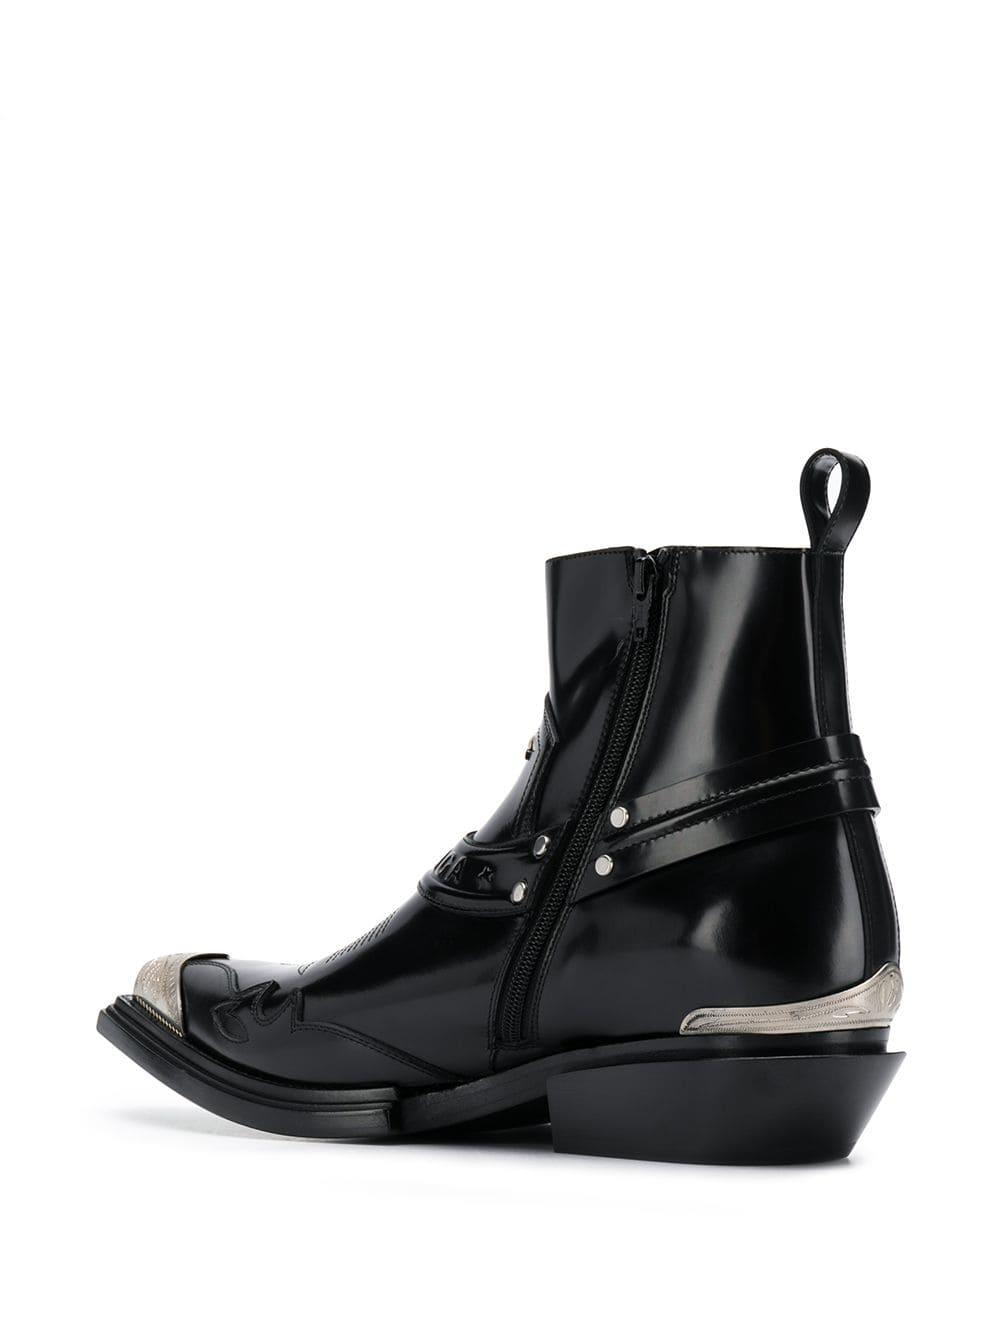 Balenciaga Santiag Harness Booties in Black for Men - Save 36% - Lyst